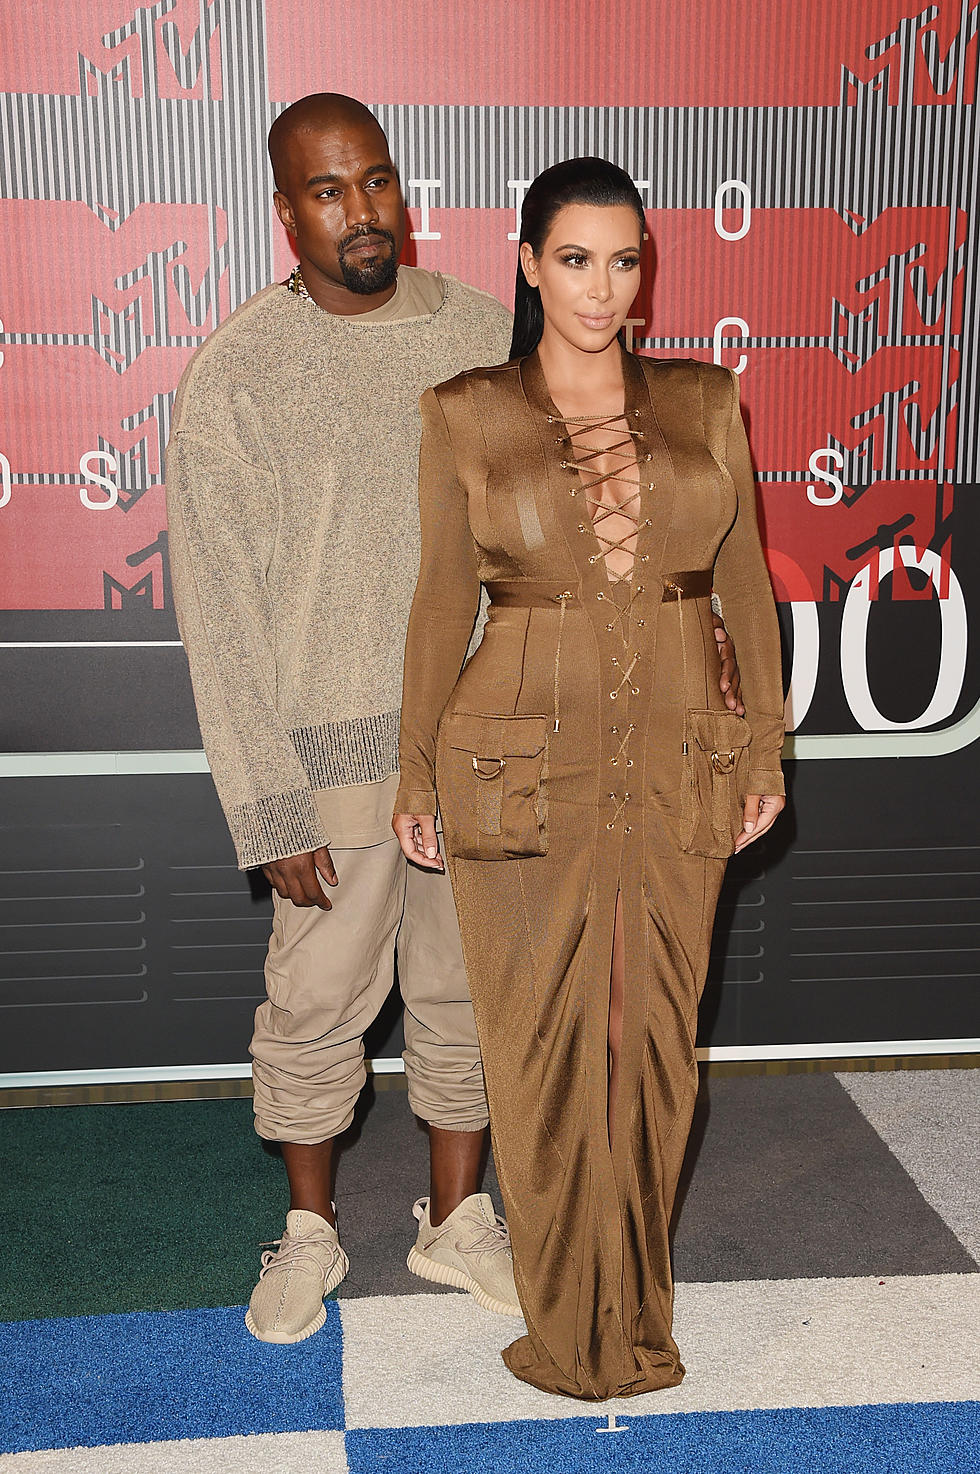 The Best Dressed Hip-Hop Stars of the 2015 MTV Video Music Awards